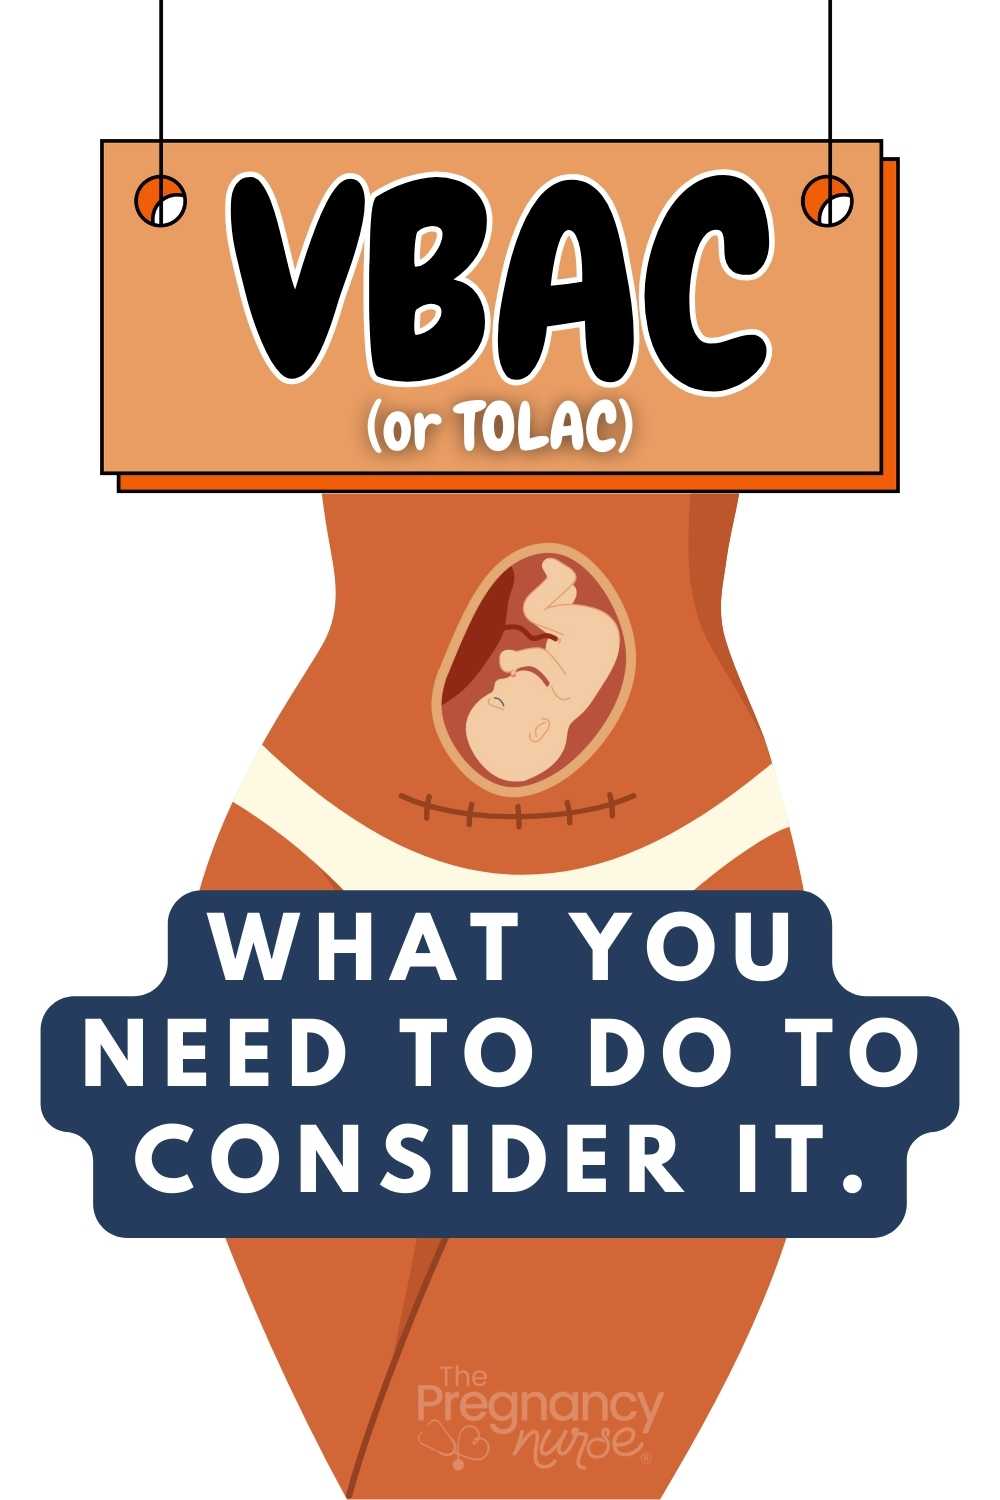 cersarean scar and a fetus on a woman's abdomen // VBAC or TOLAC - what you need to do to consider it.